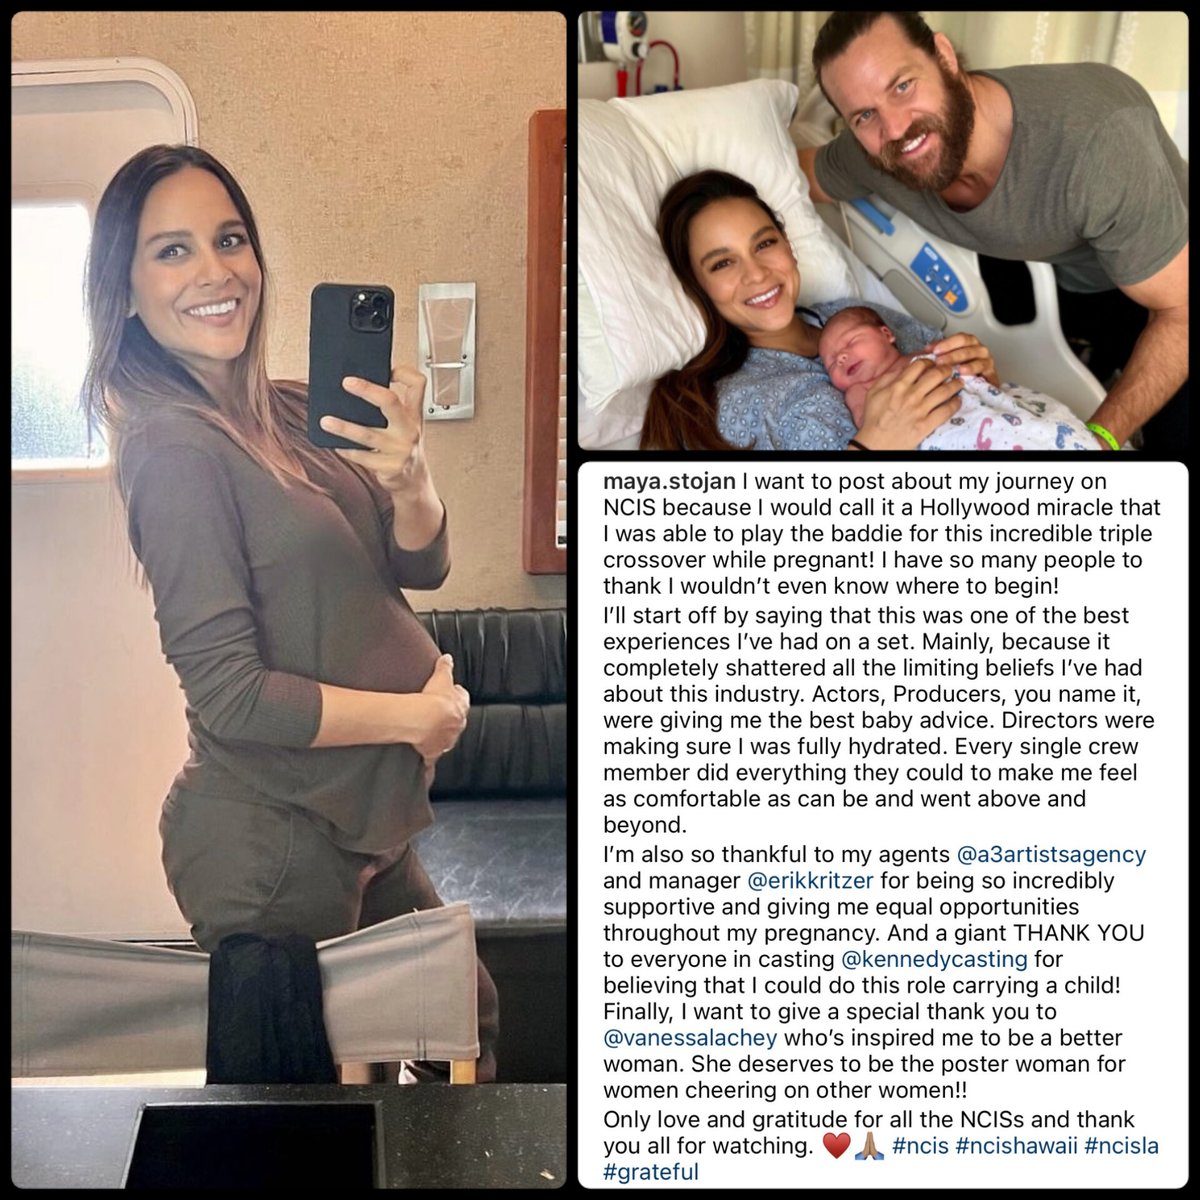 @NCISVERSEUPDATE @MayaStojan Very beautiful words of gratitude and acknowledgement from the wonderful @MayaStojan to the cast and crew of #NCISHawaii. 'Gratitude is the fairest blossom which springs from the soul.' (Henry W. Beecher) Congratulations on your precious baby! The #NCISHawaii #Ohana grows 👶🏻